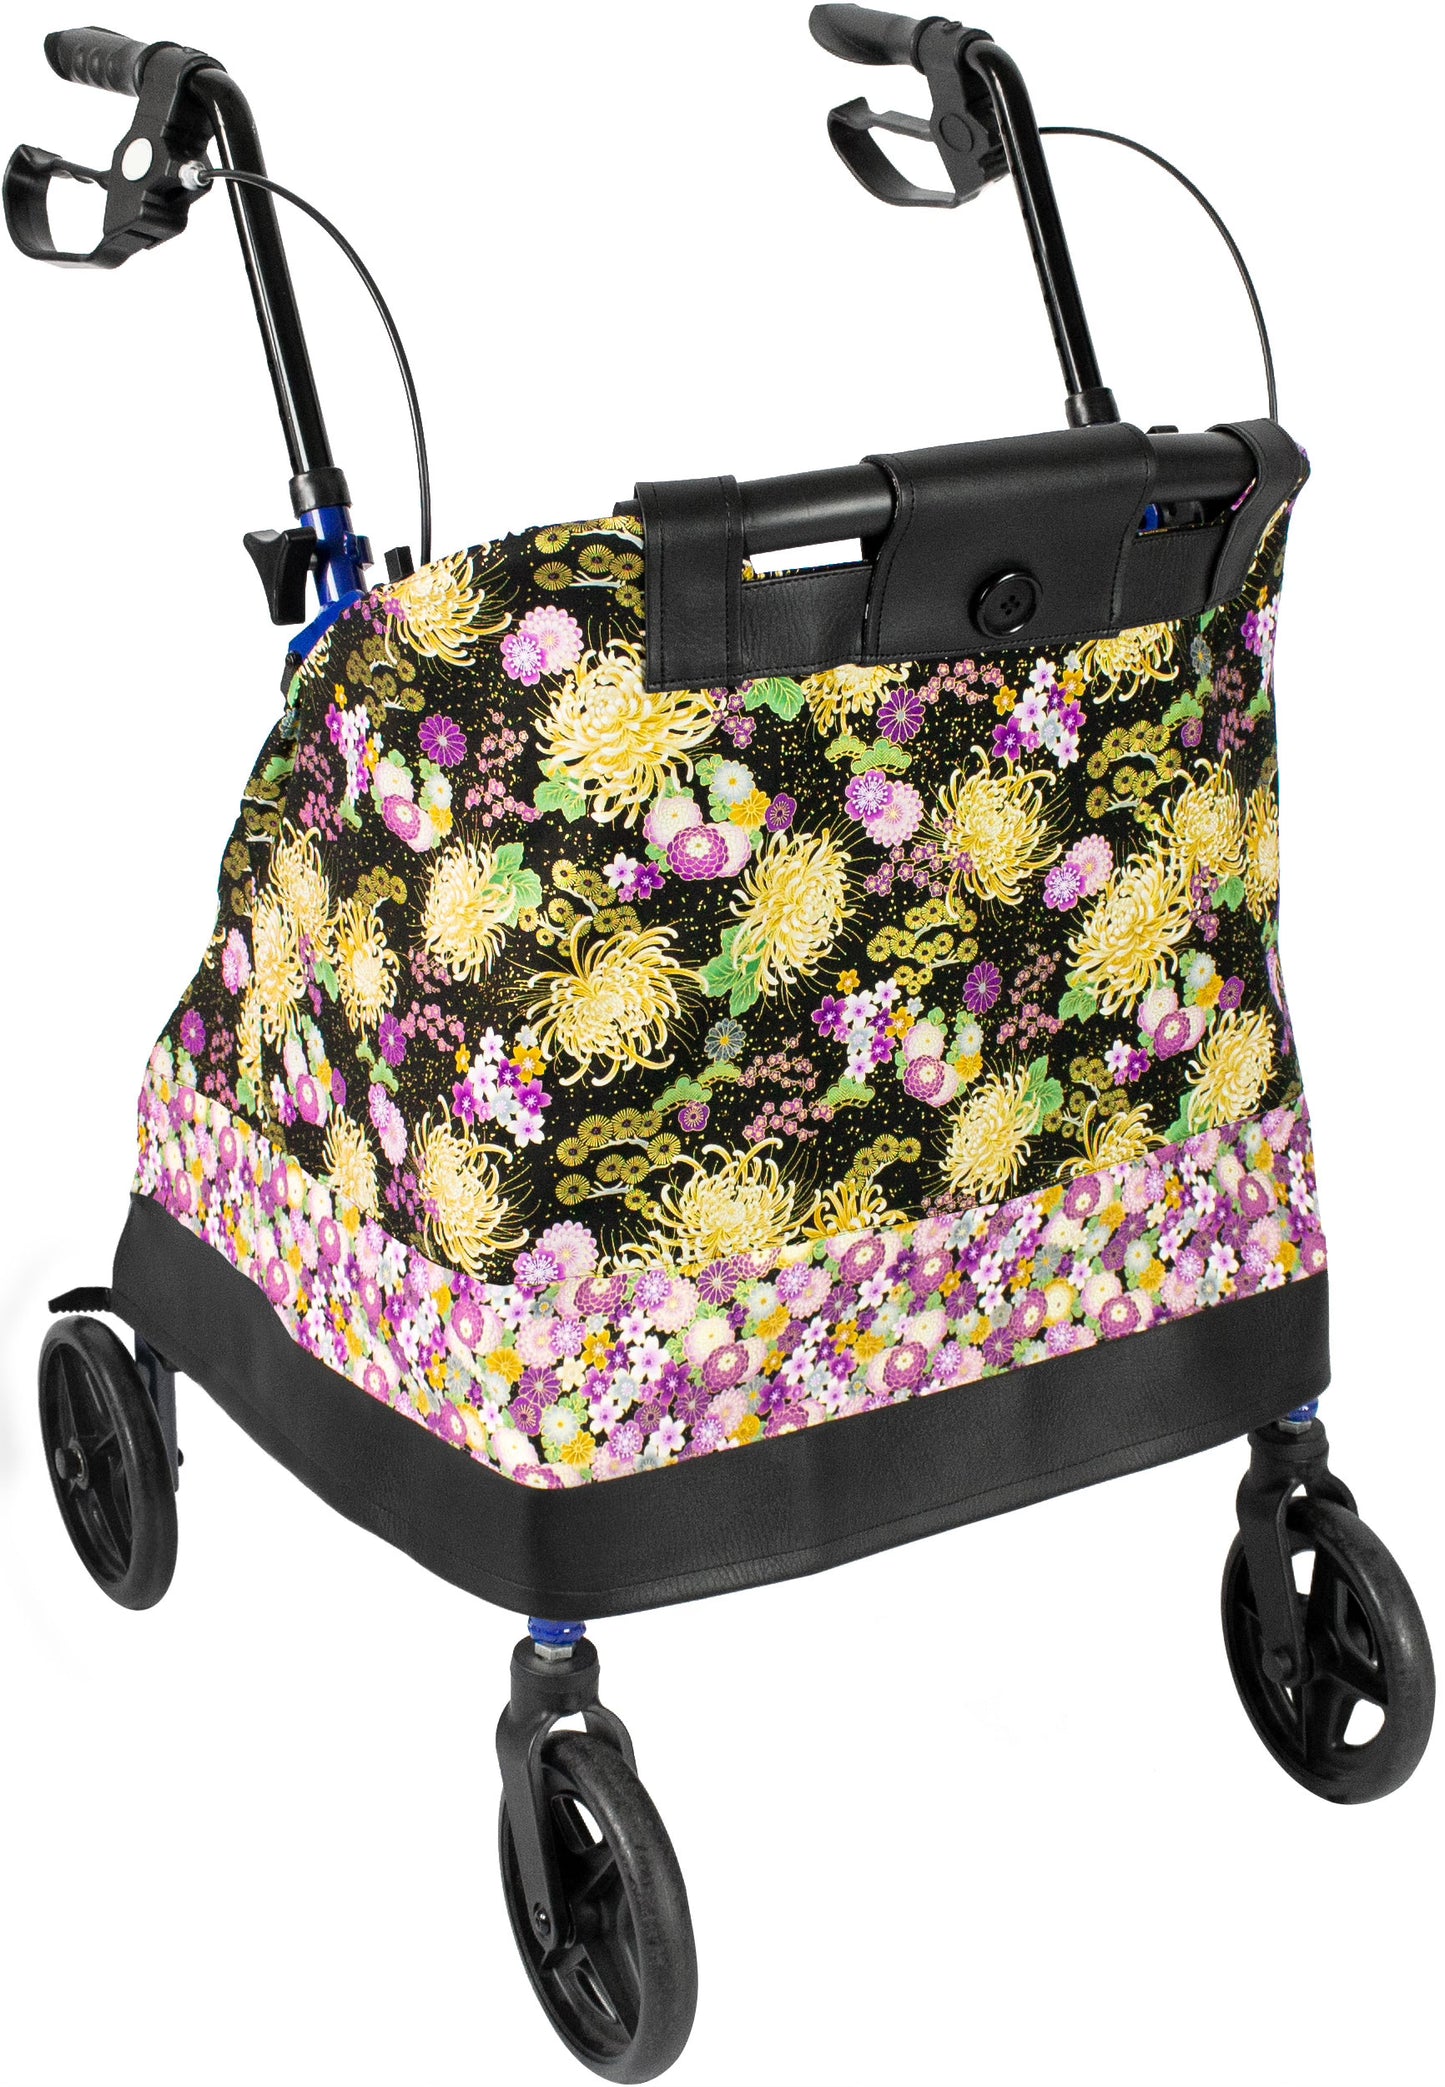 METALLIC FLORAL GARDEN-small flower lining - *Shipping included in price